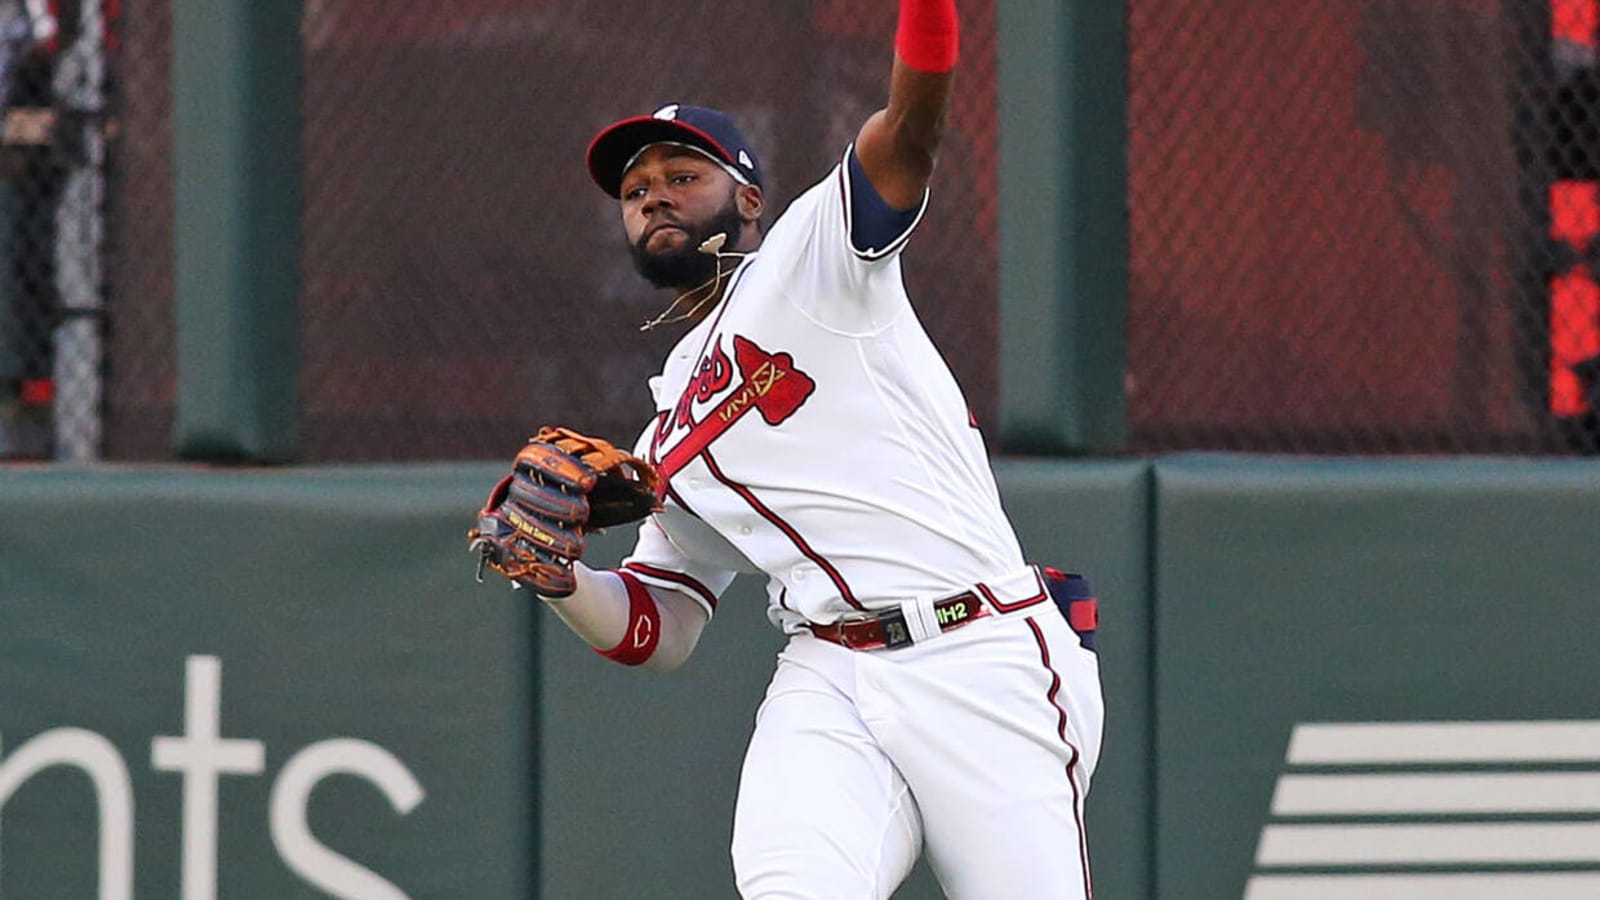 Watch: Unbelievable play gets Braves out of trouble